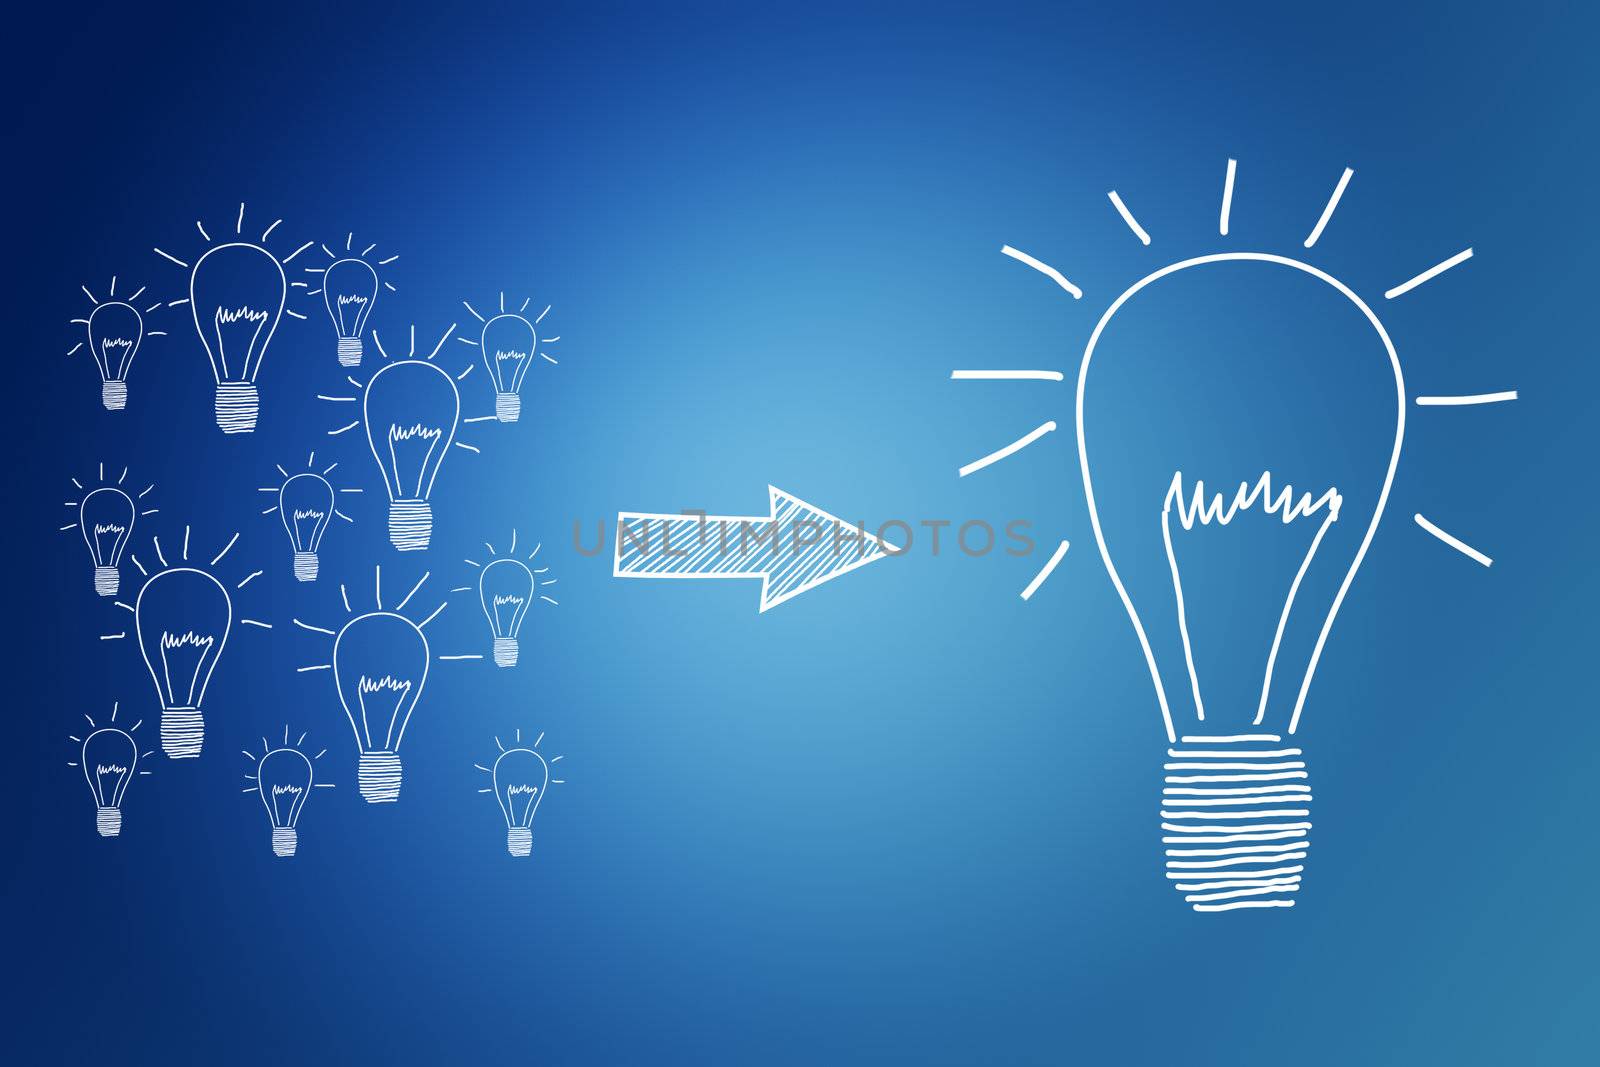 creativity concept to manage good ideas on blue background